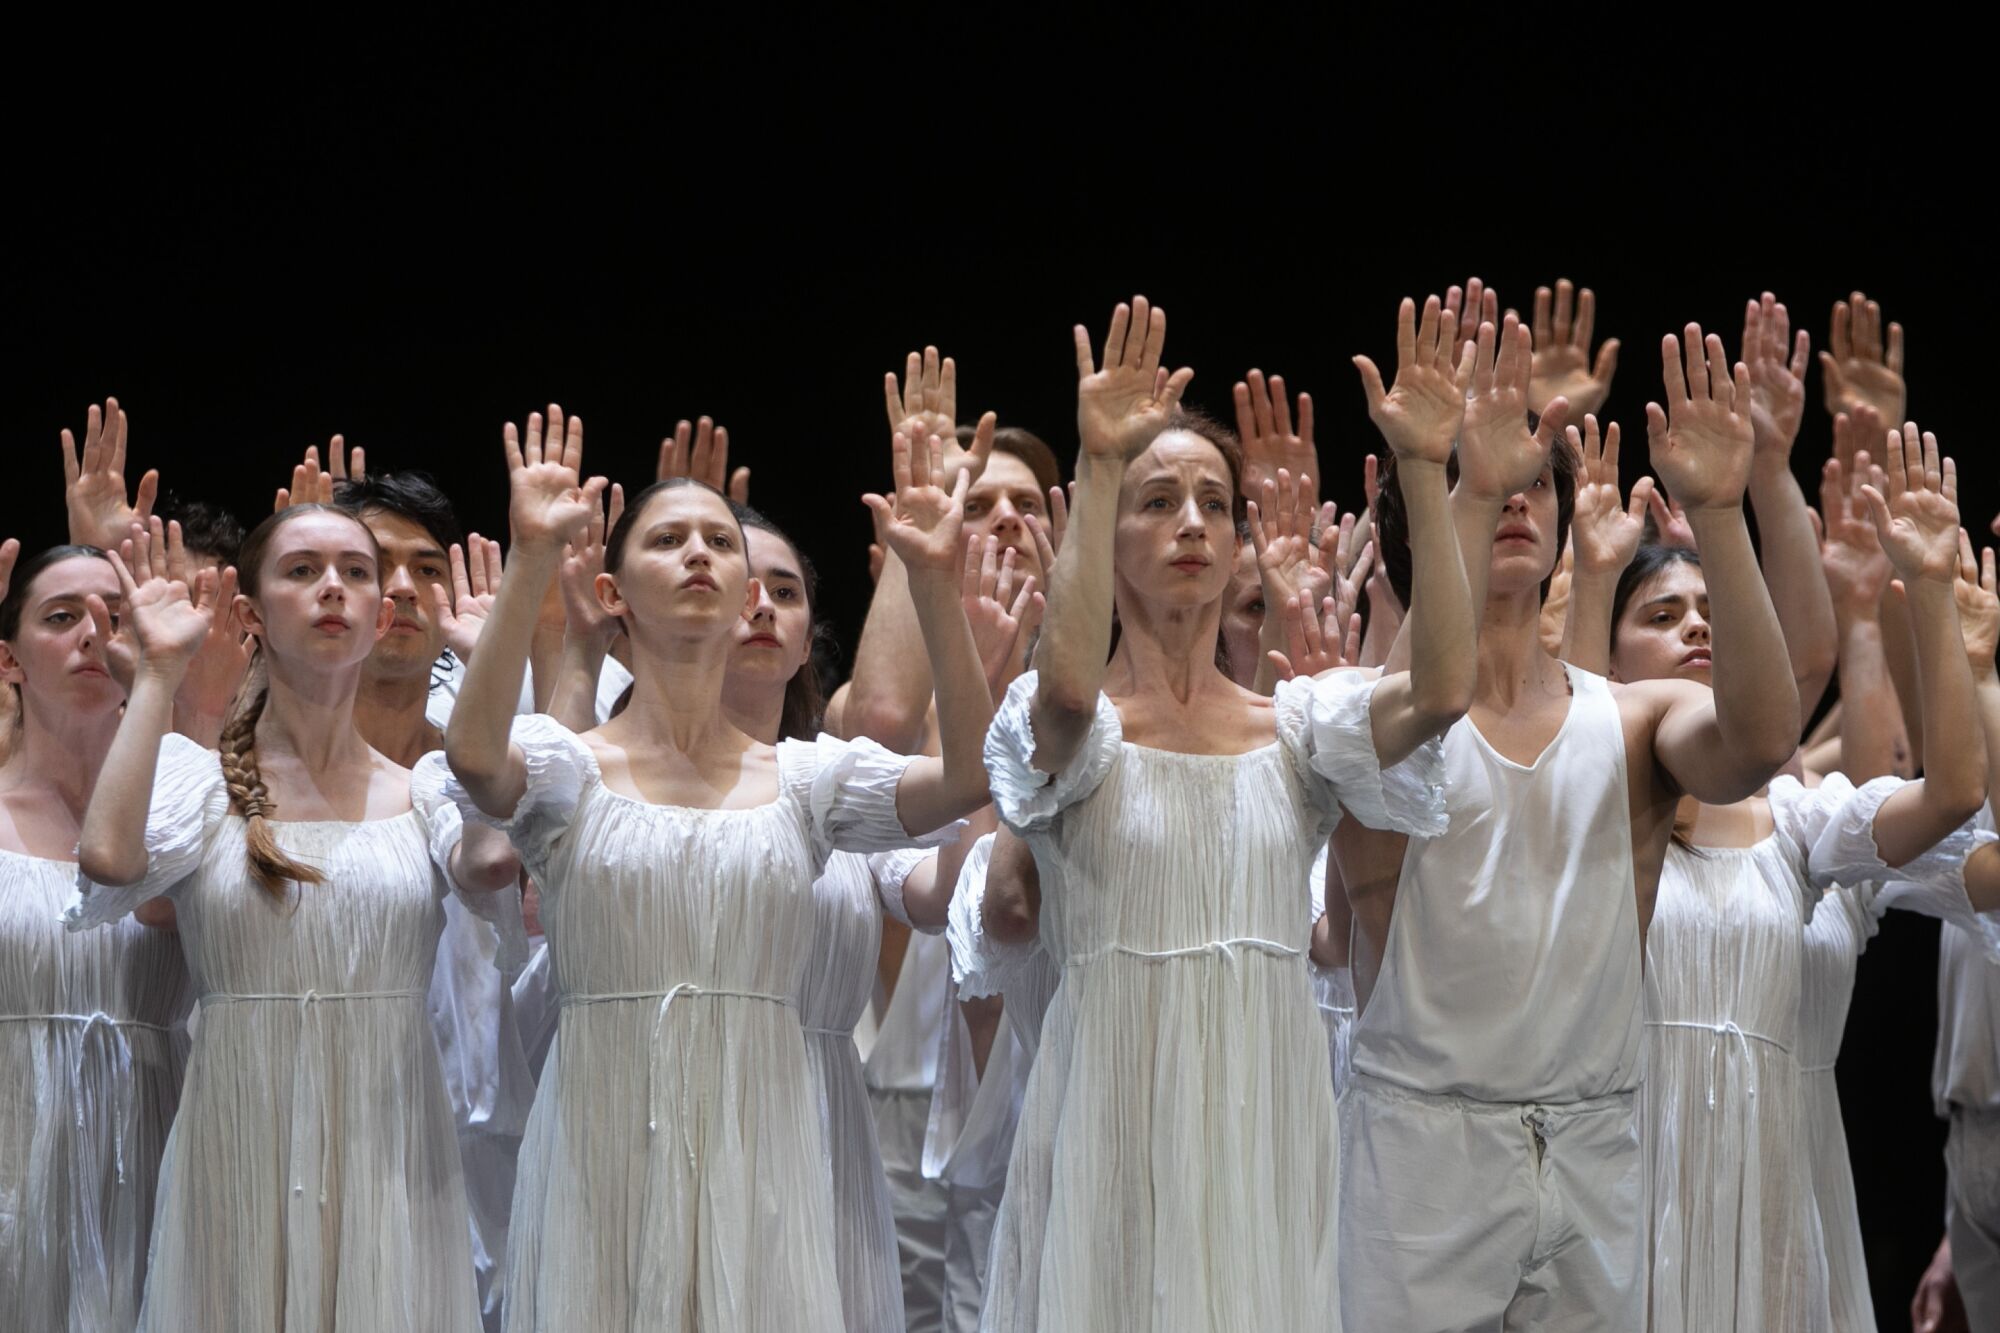 A group of dancers raise both arms.